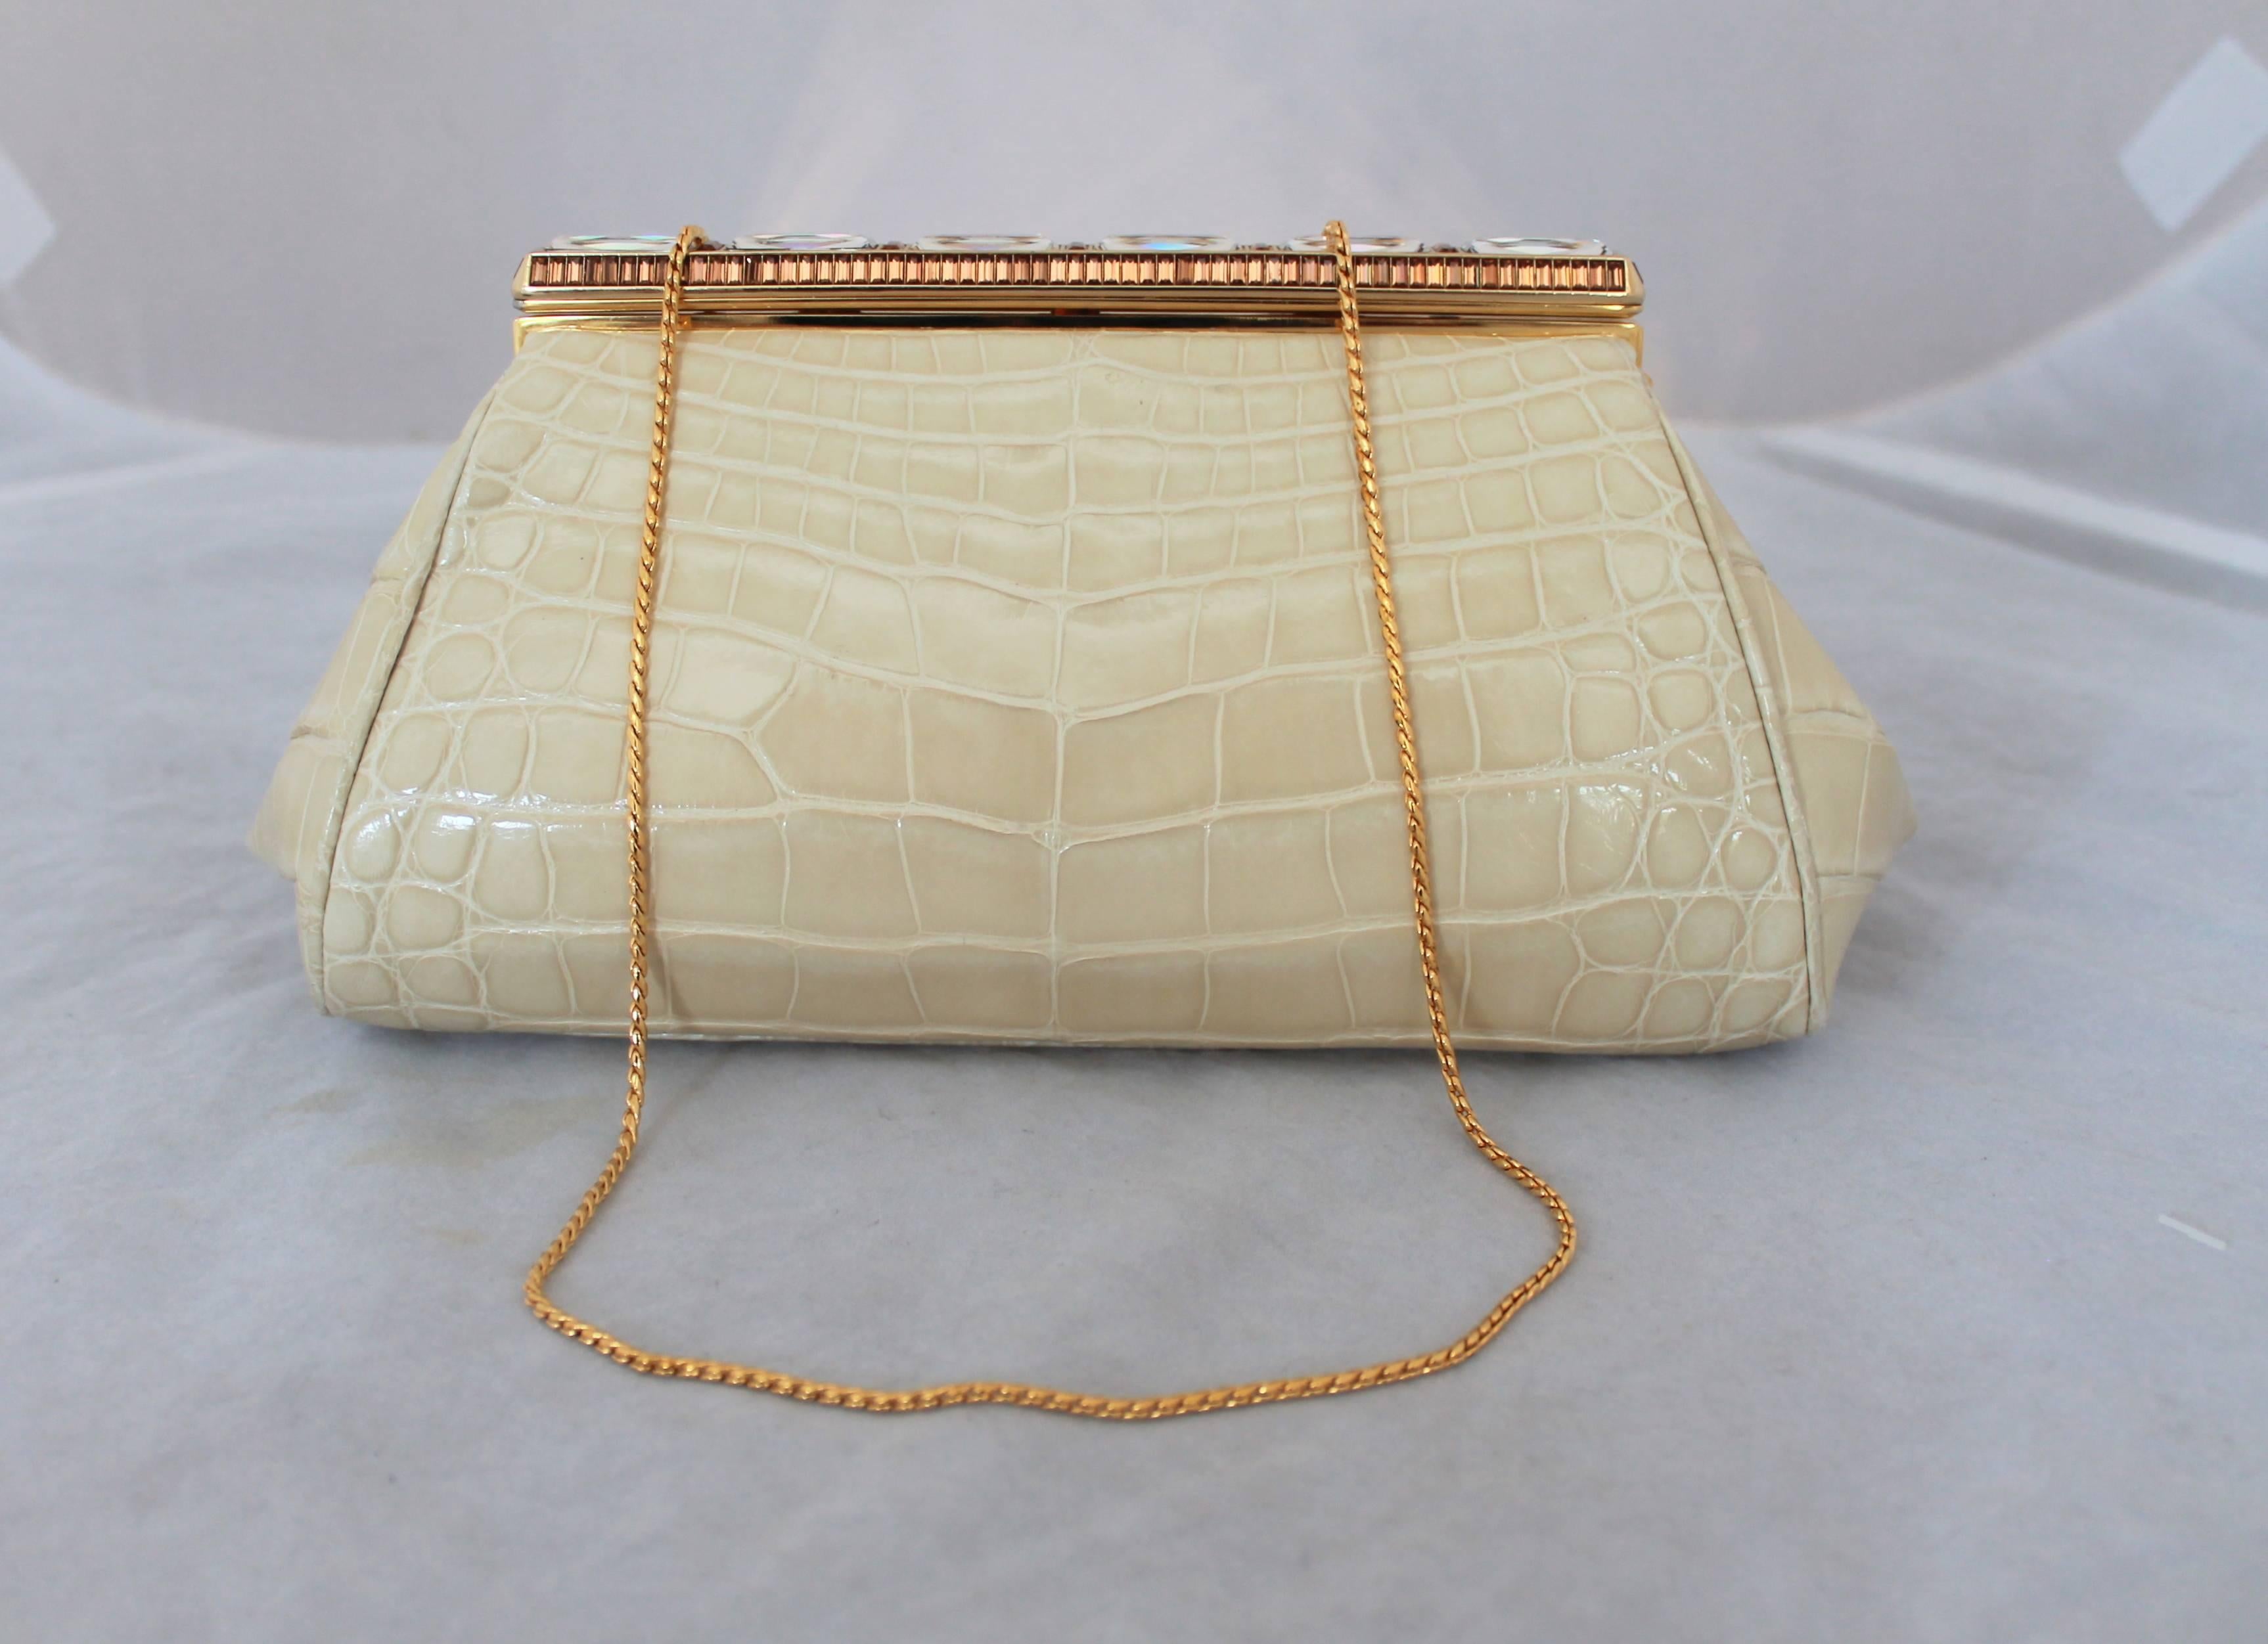 Judith Leiber Ivory Crocodile Clutch with Rhinestone and Gold Clasp. This piece is in excellent condition and has a longer gold strap. The inside lining is white leather. 

Measurements:
Height- 4.75"
Length- 8.5"
Depth-